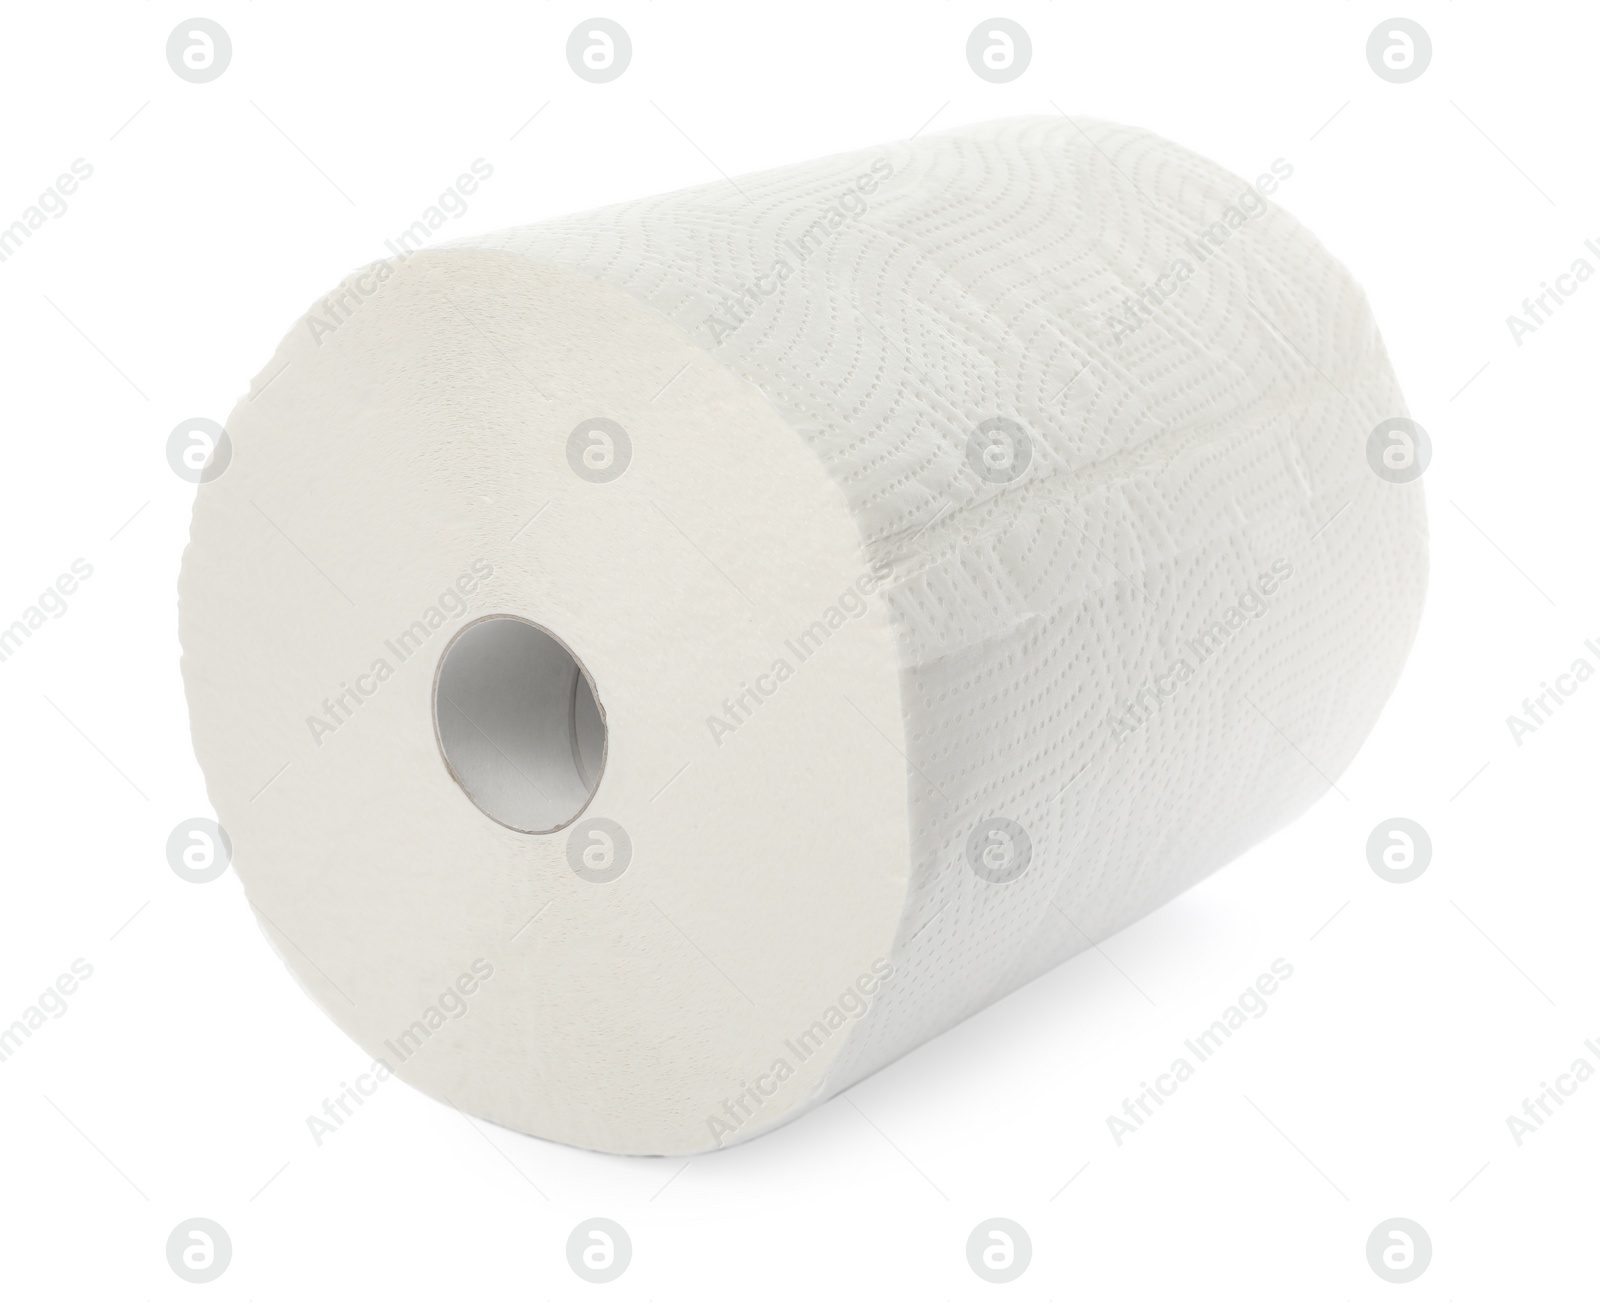 Photo of Roll of paper towels isolated on white